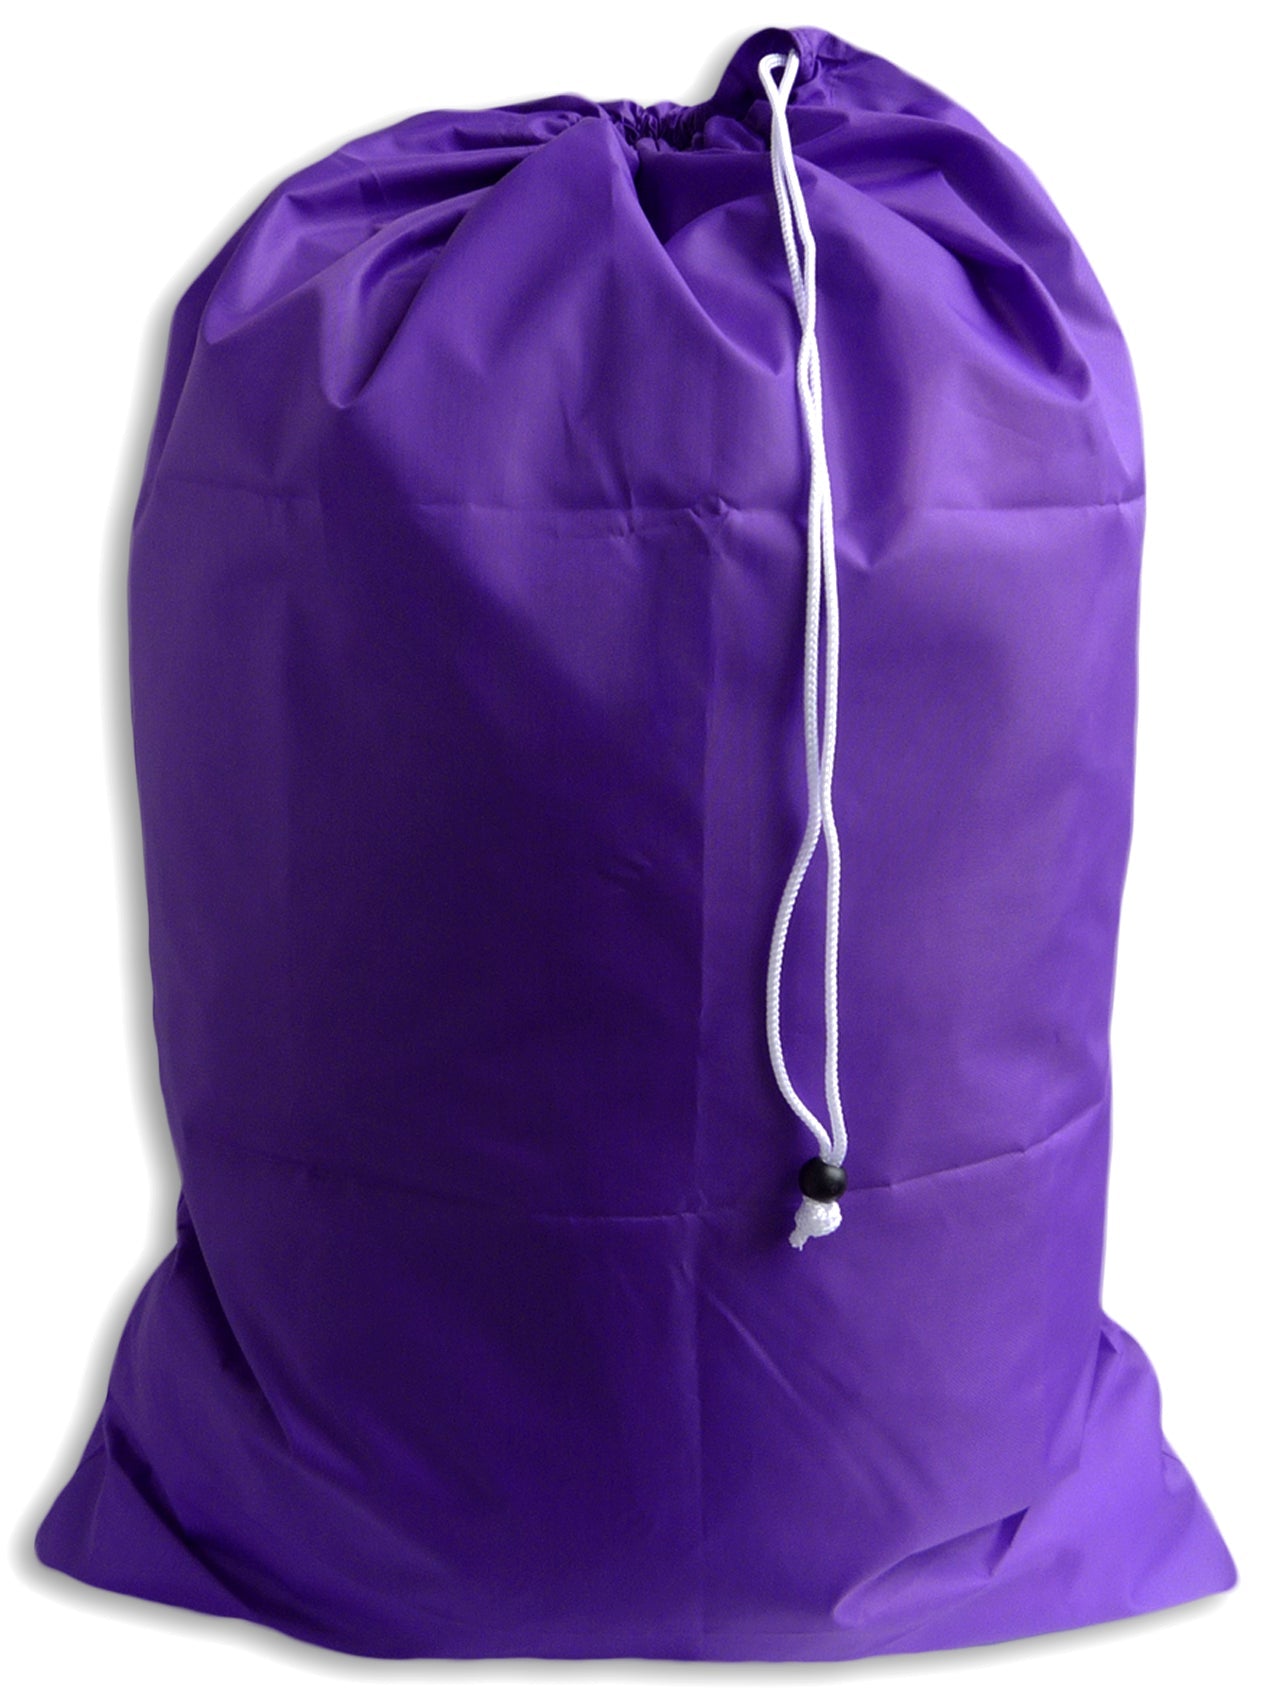 Homelux Large 30 x 40 inch Heavy Duty Nylon Laundry Bag with Drawstring Slip Lock Closure Assorted Colors and Designs